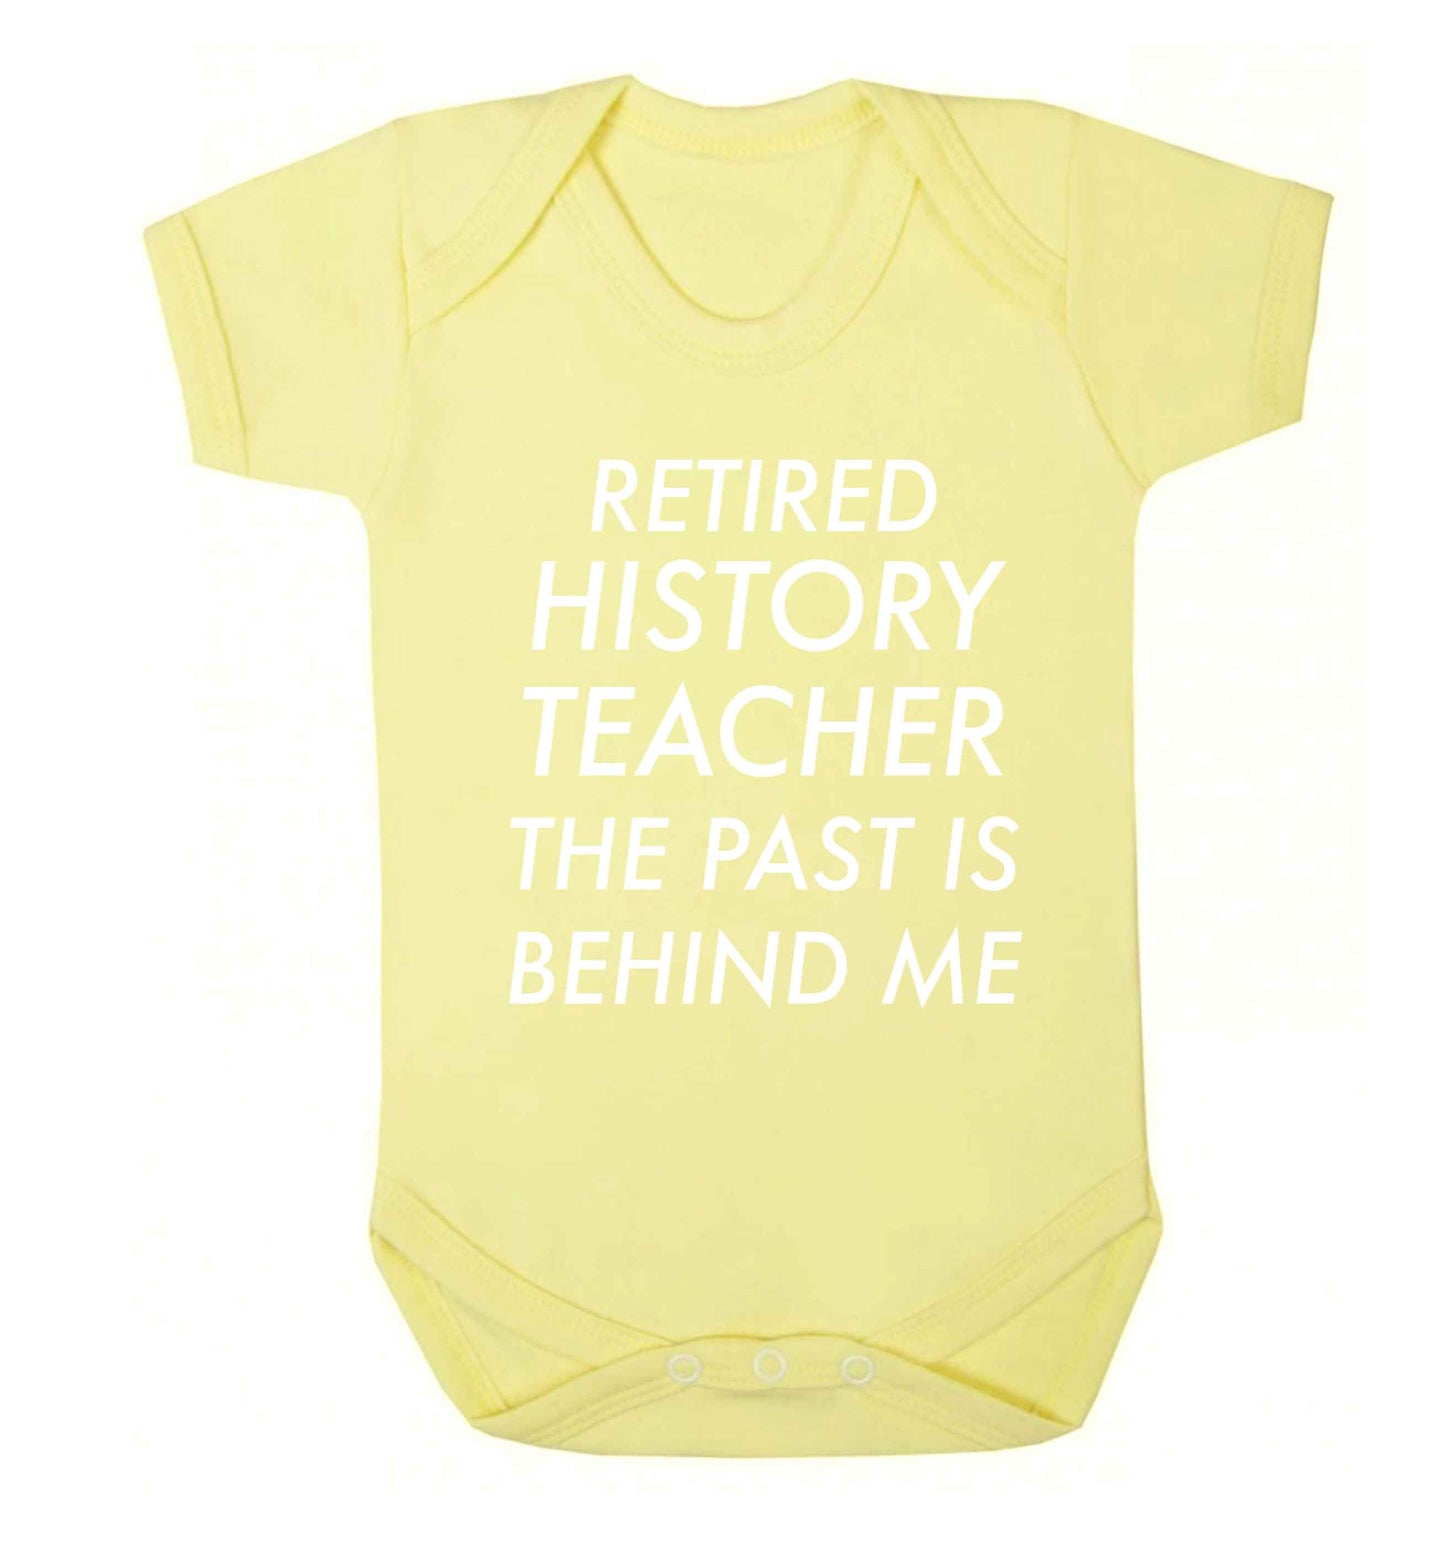 Retired history teacher the past is behind me Baby Vest pale yellow 18-24 months